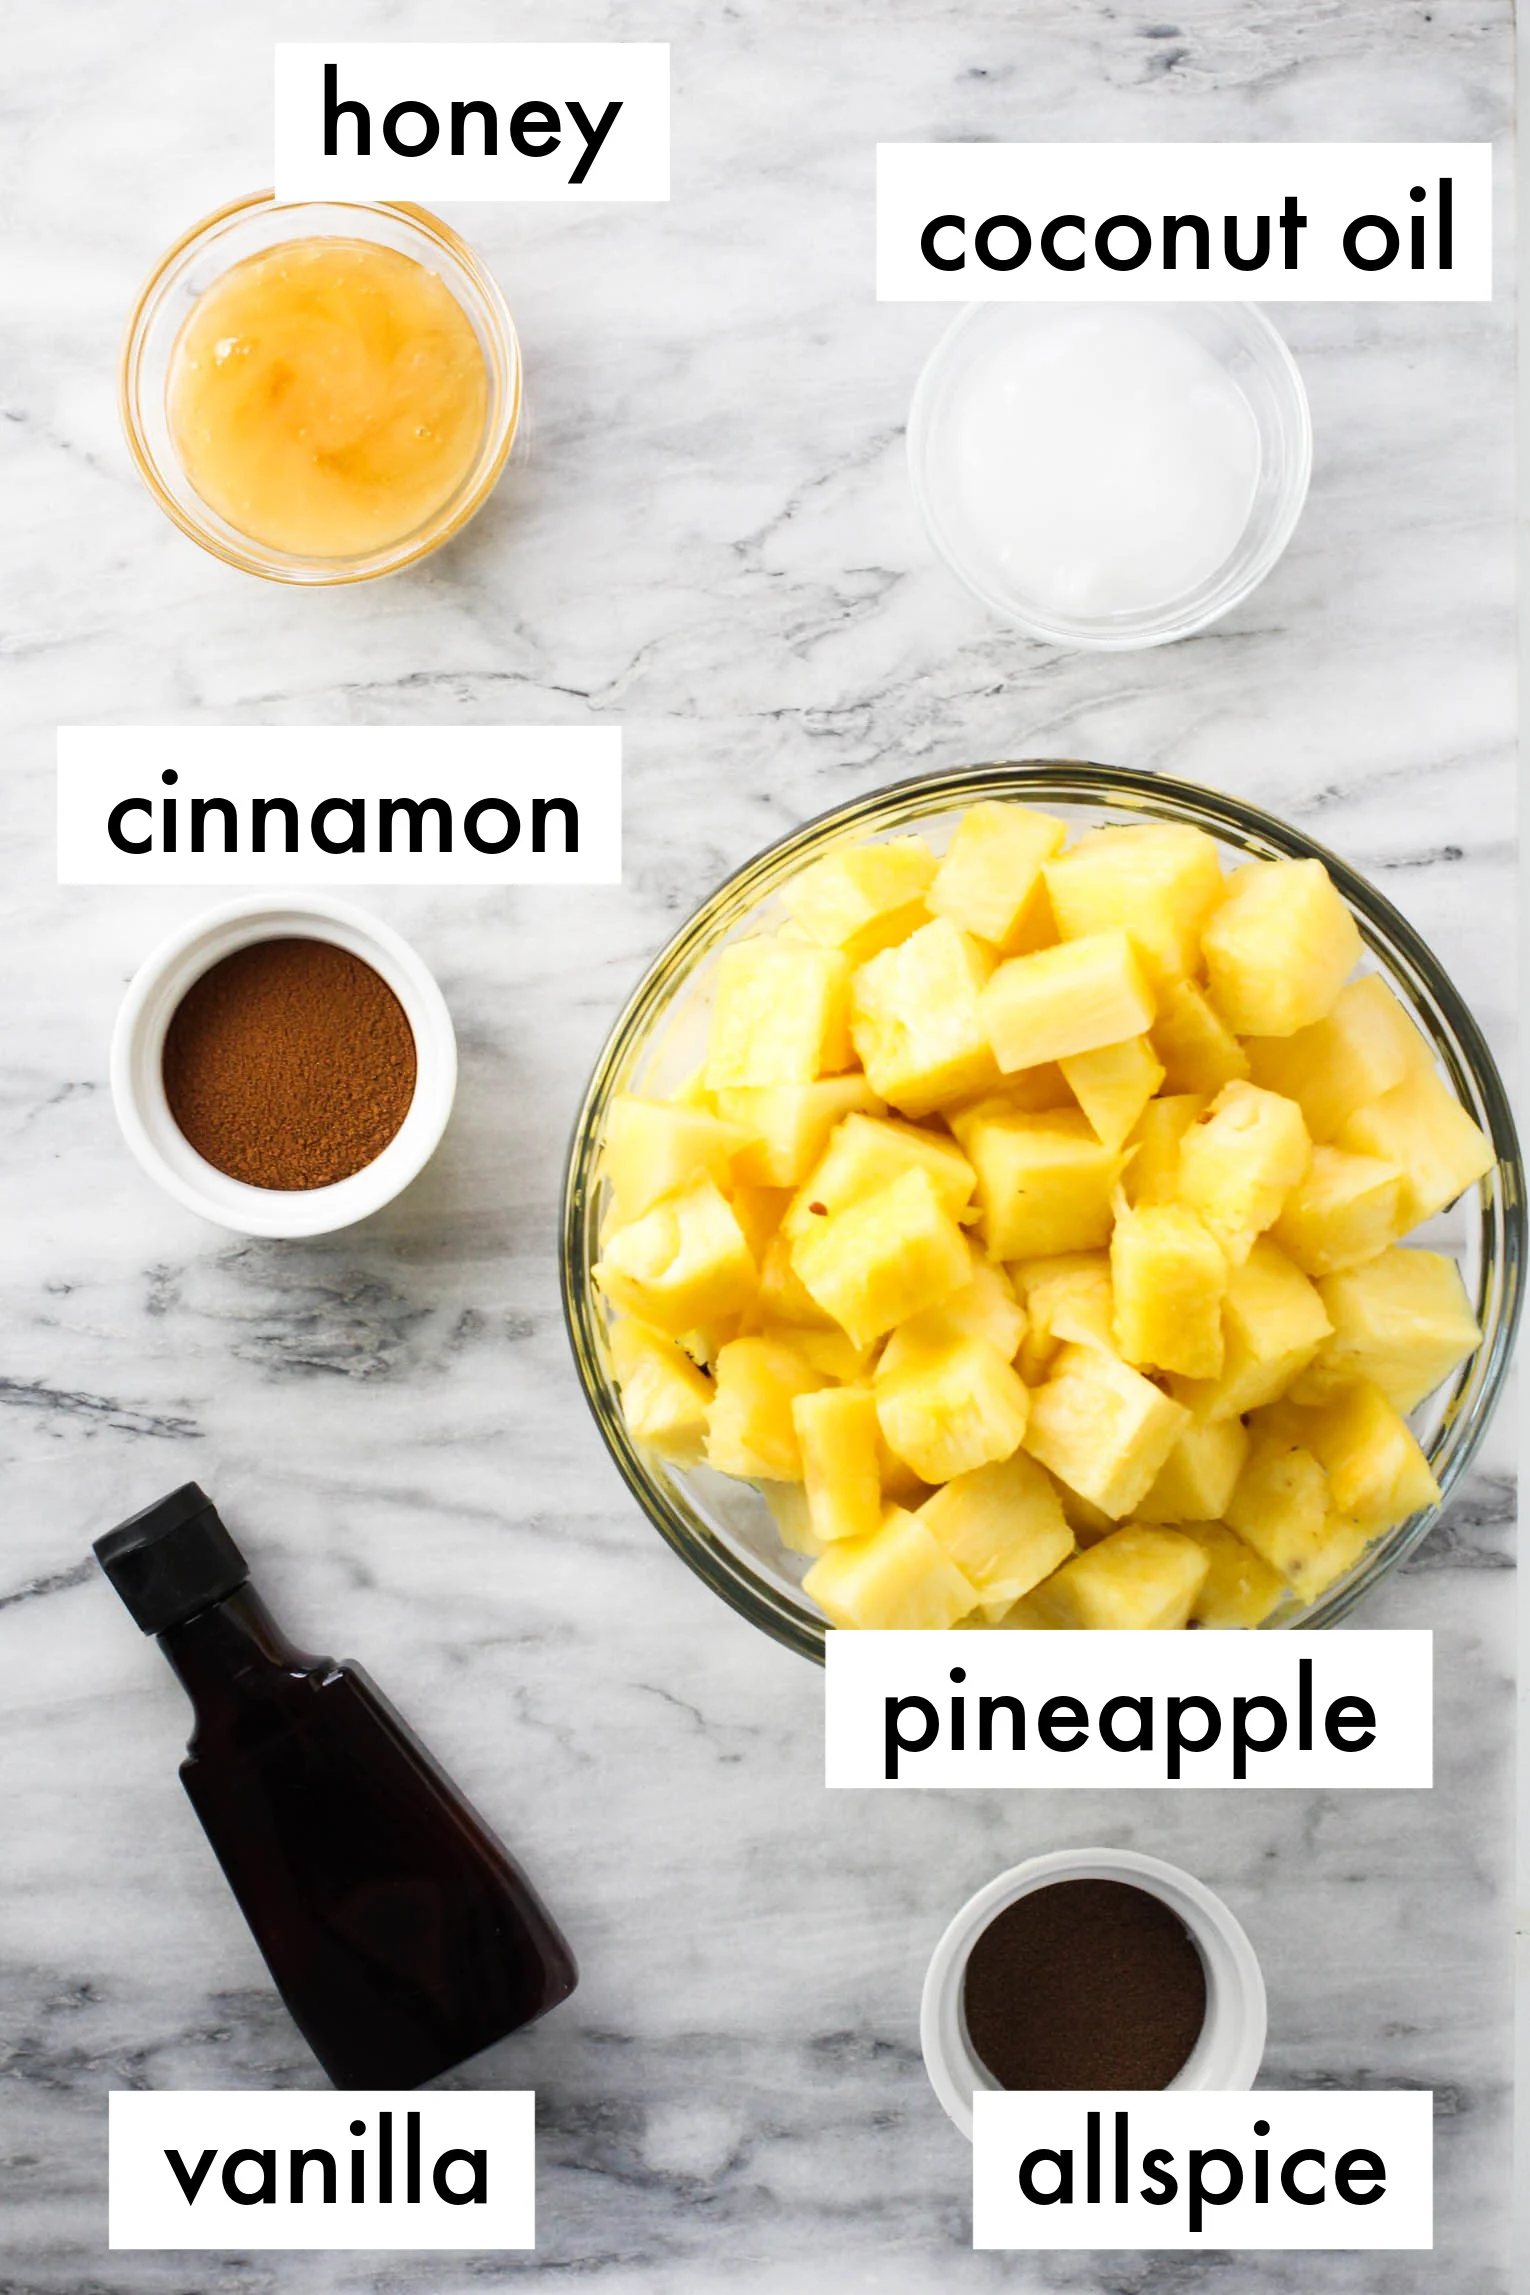 Roasted pineapple ingredients displayed on the marble background. The ingredients are labeled as follows: honey, coconut oil, cinnamon, pineapple, vanilla, allspice.